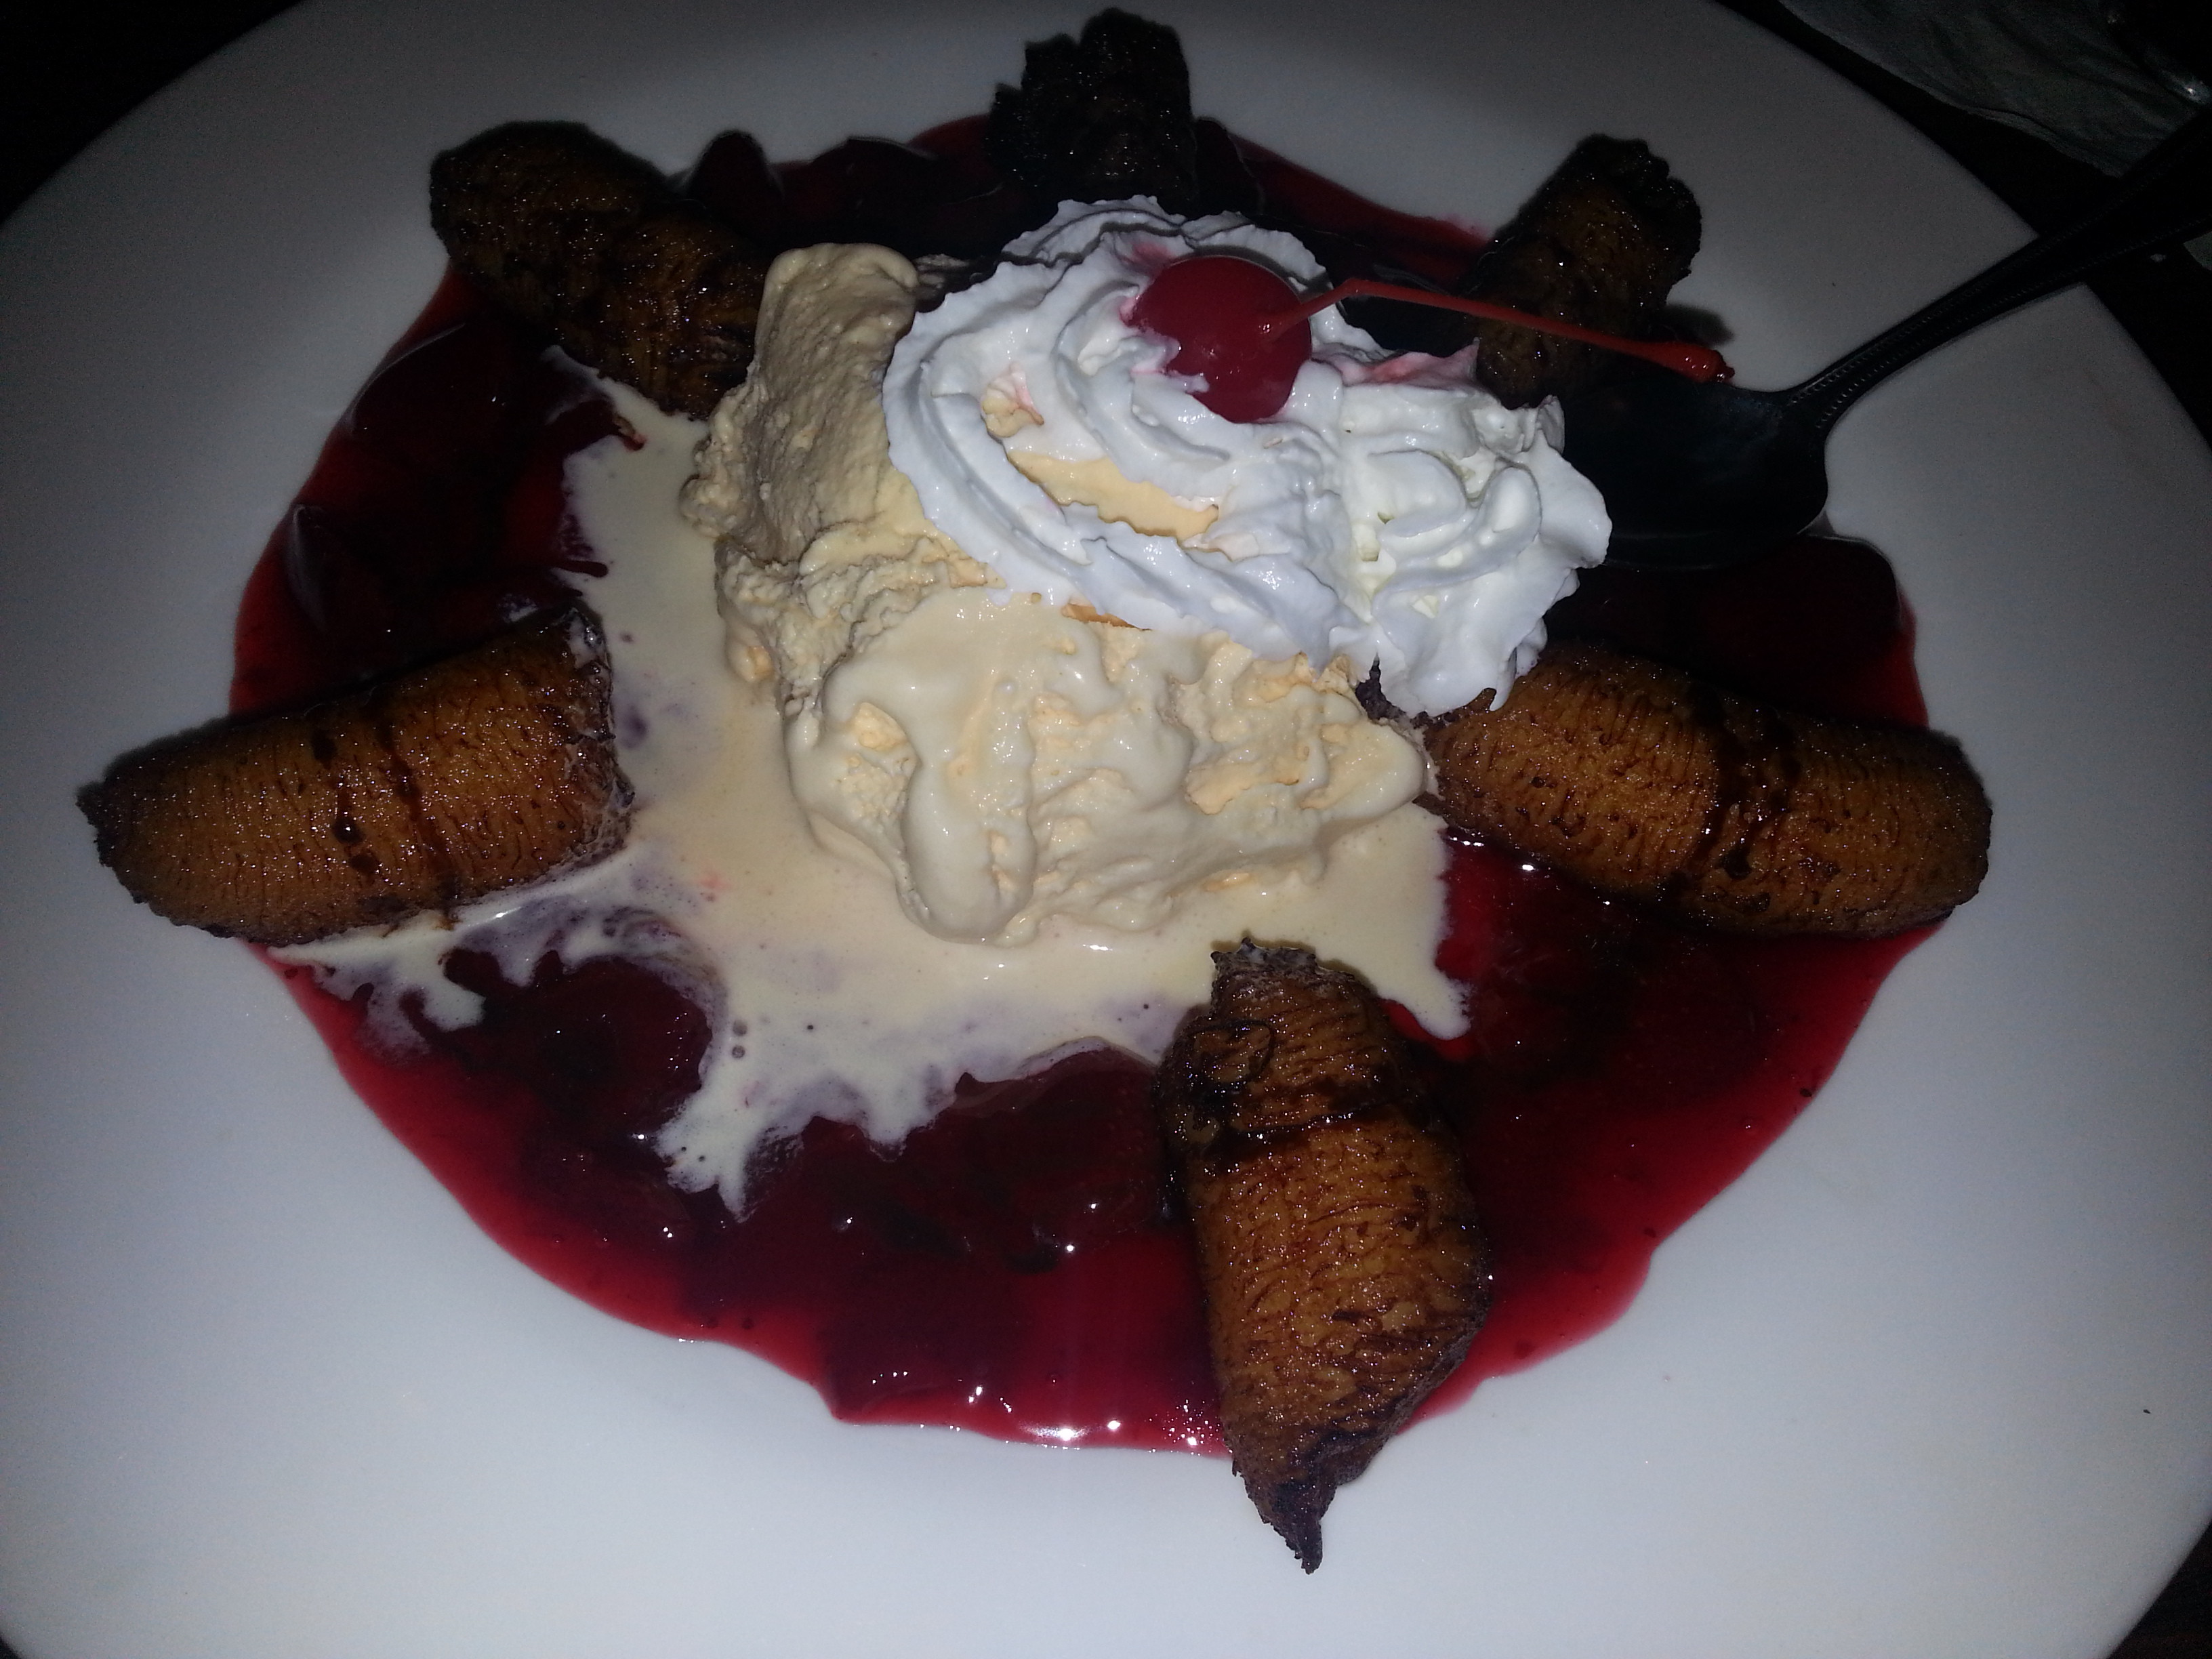 Fried bananas with strawberry sauce, vanilla ice cream and chocolate drizzle. (Photo: Mark Heckathorn/DC on Heels)